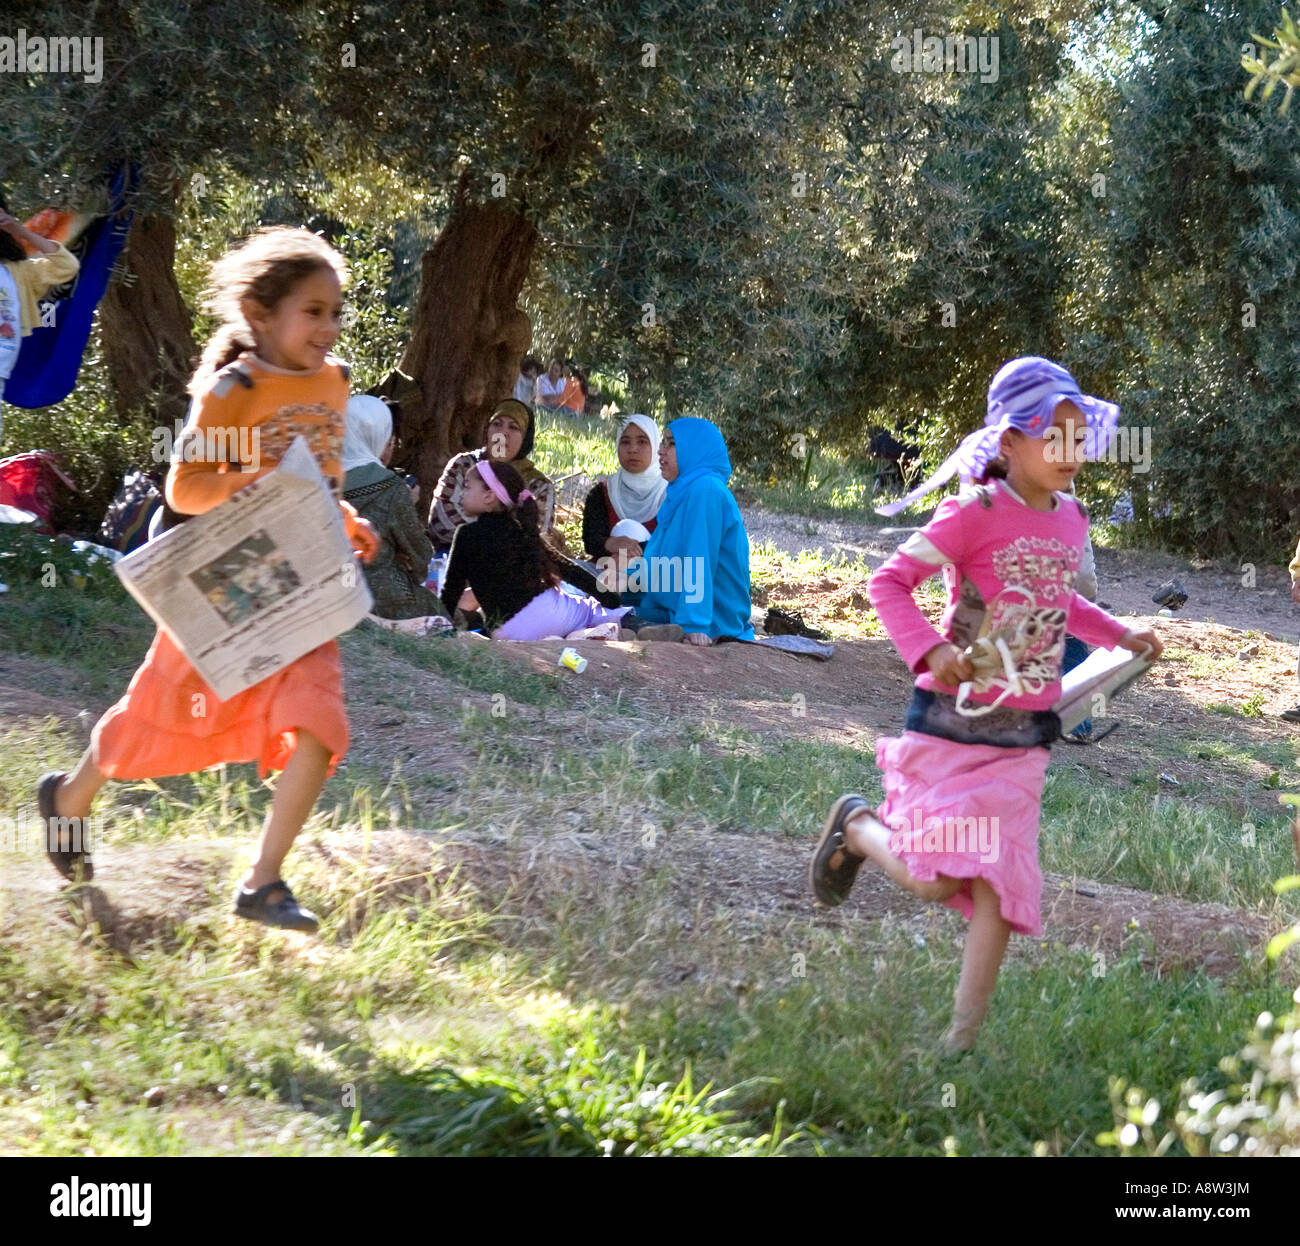 Children playing whilst family has a picnic under the Olive trees in the Jardin de la Menara Marrakech Stock Photo